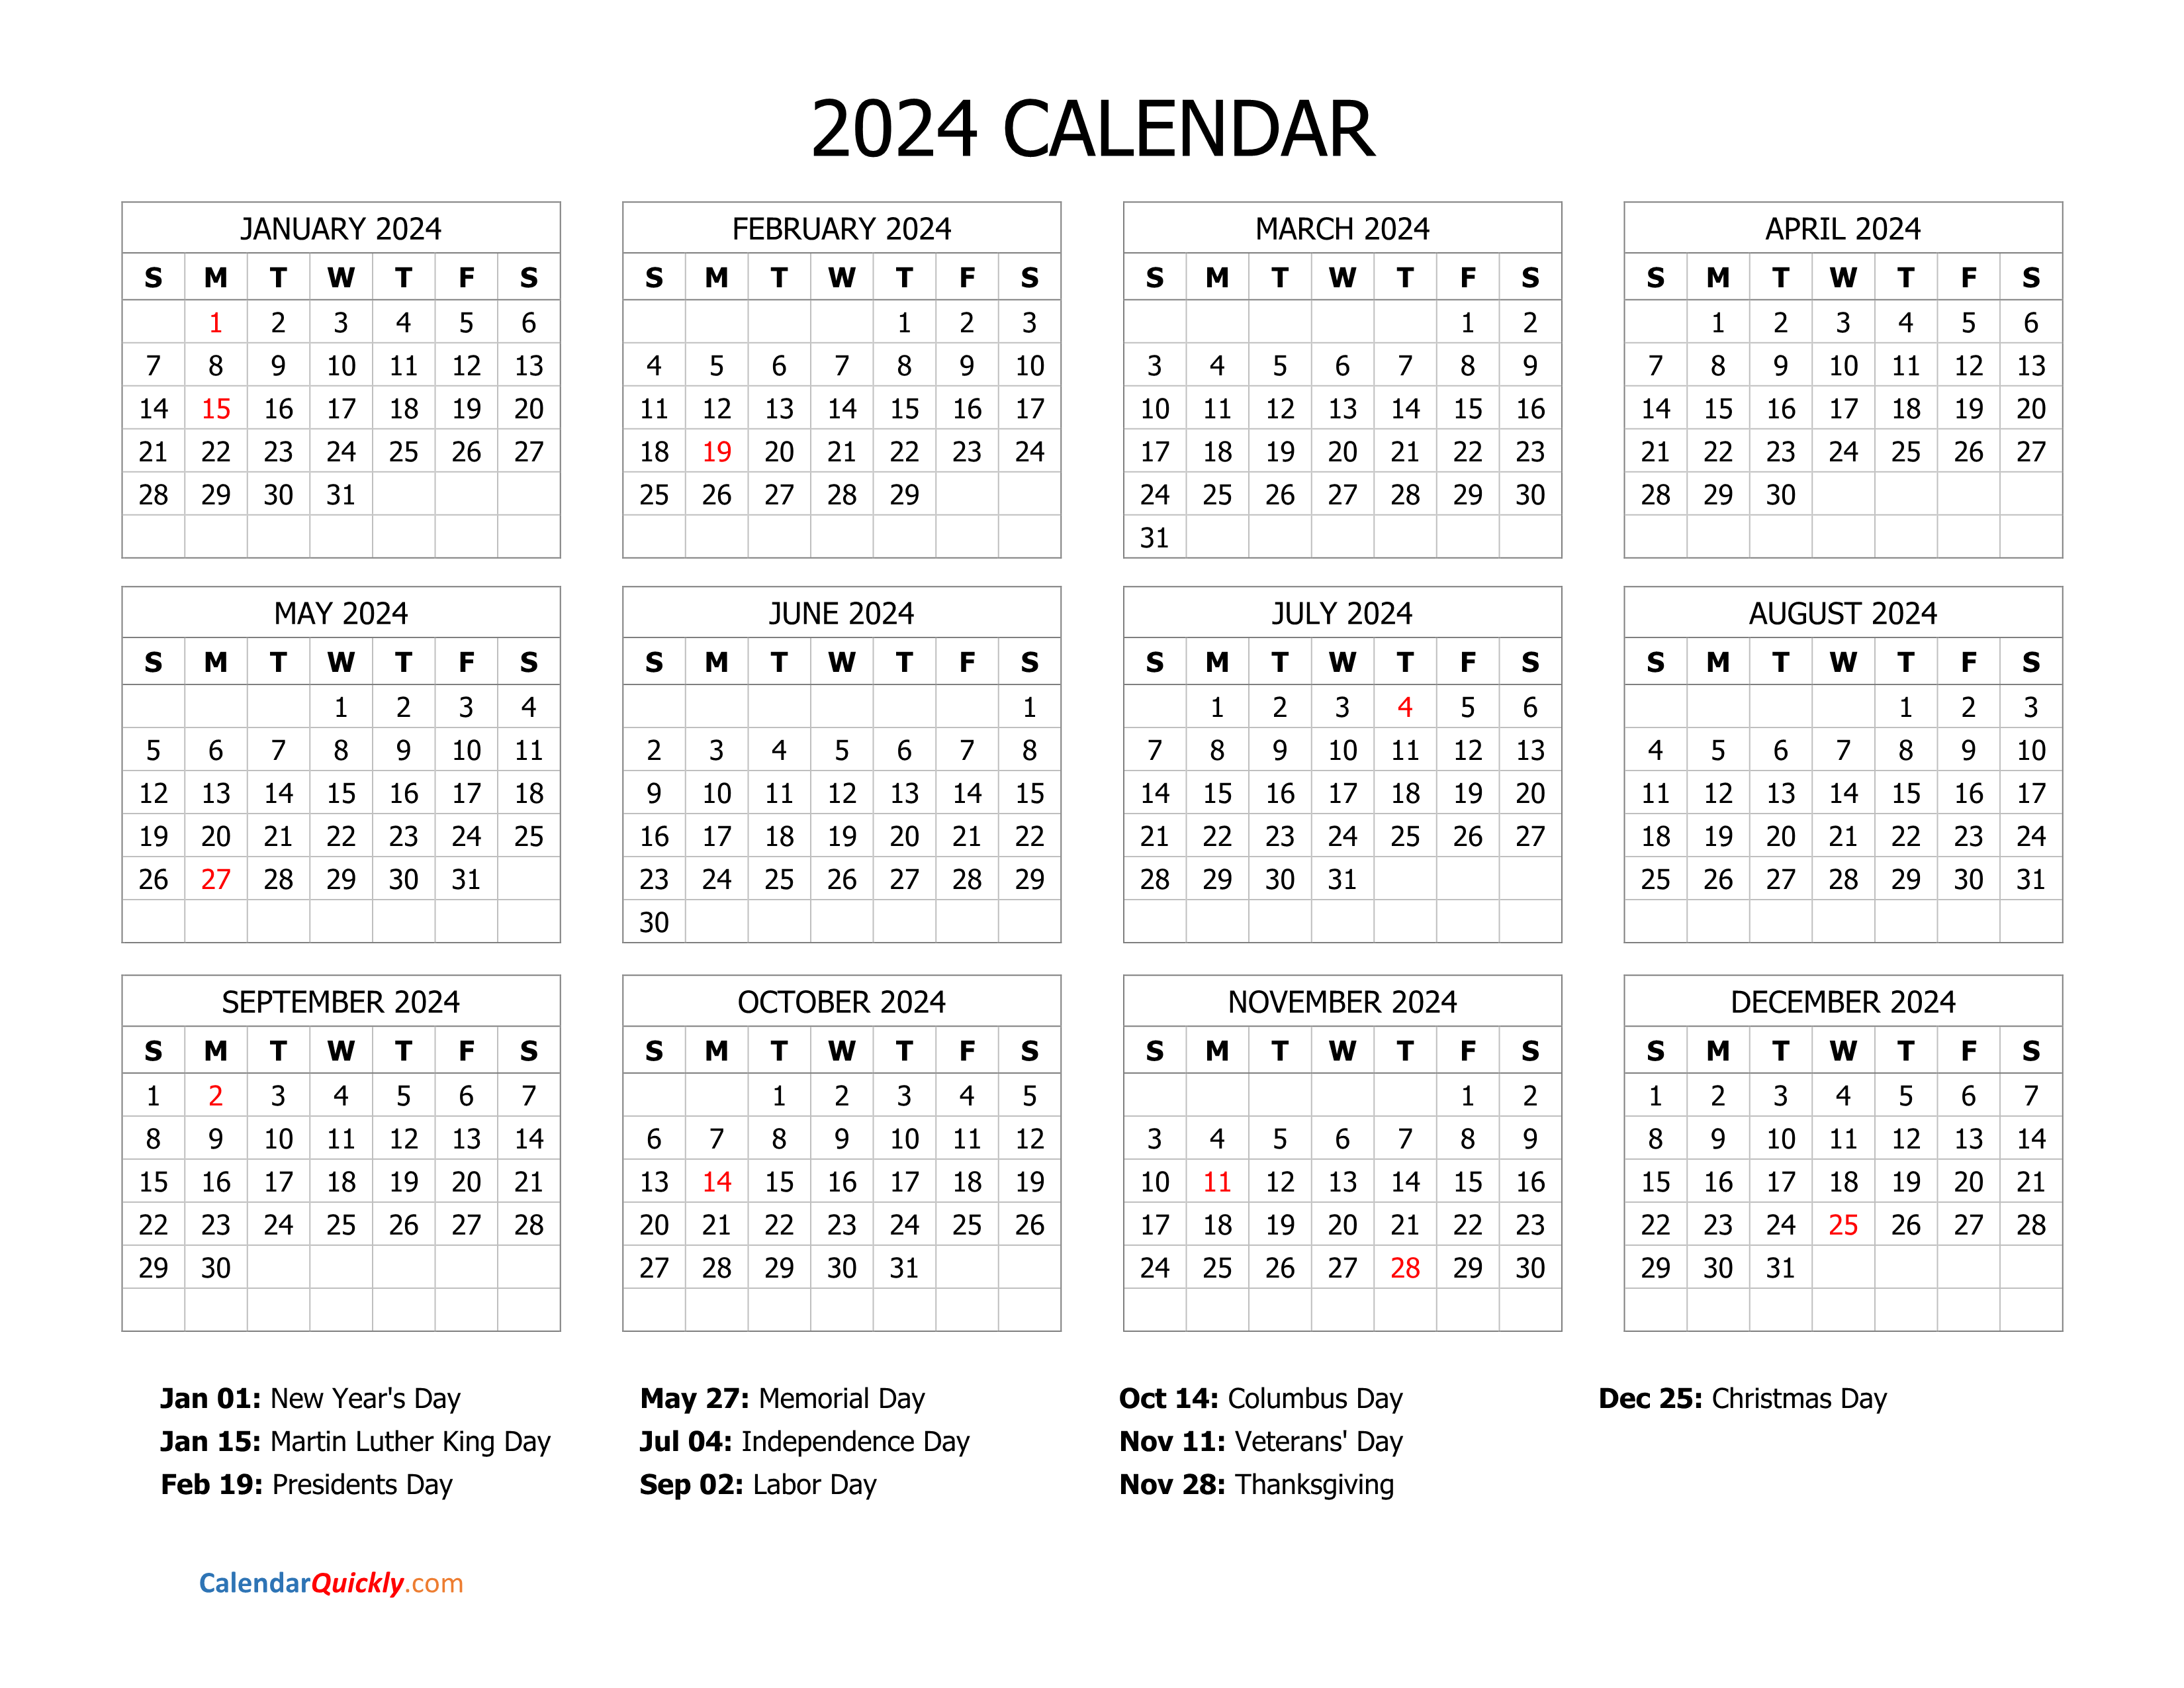 Printable Calendar 2024 With Holidays - Free Printable 2024 Calendar Month By Month